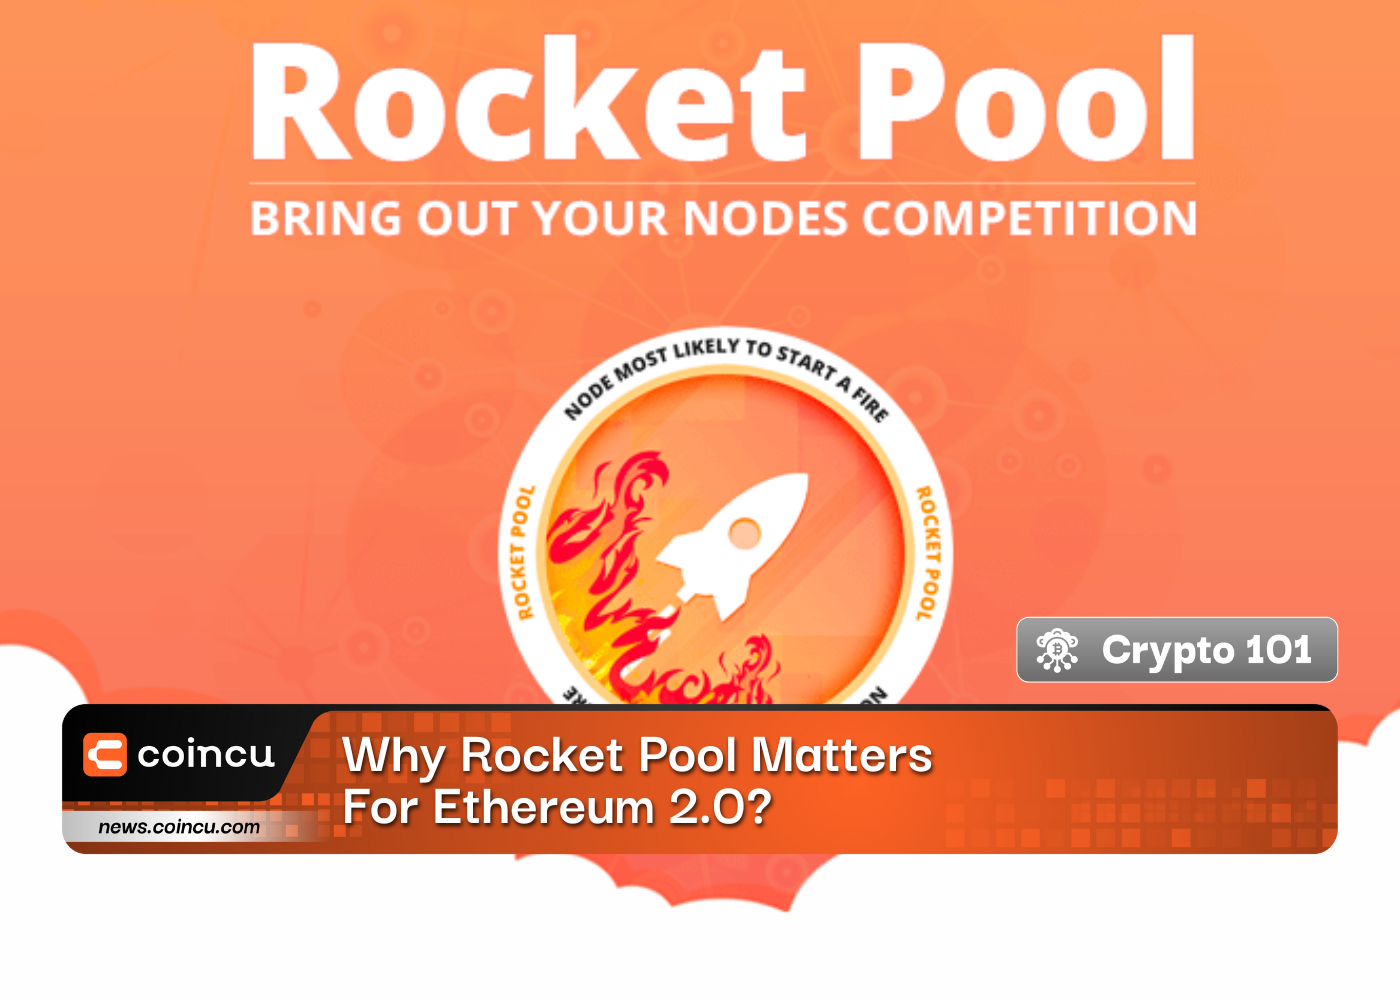 Why Rocket Pool Matters For Ethereum 2.0?